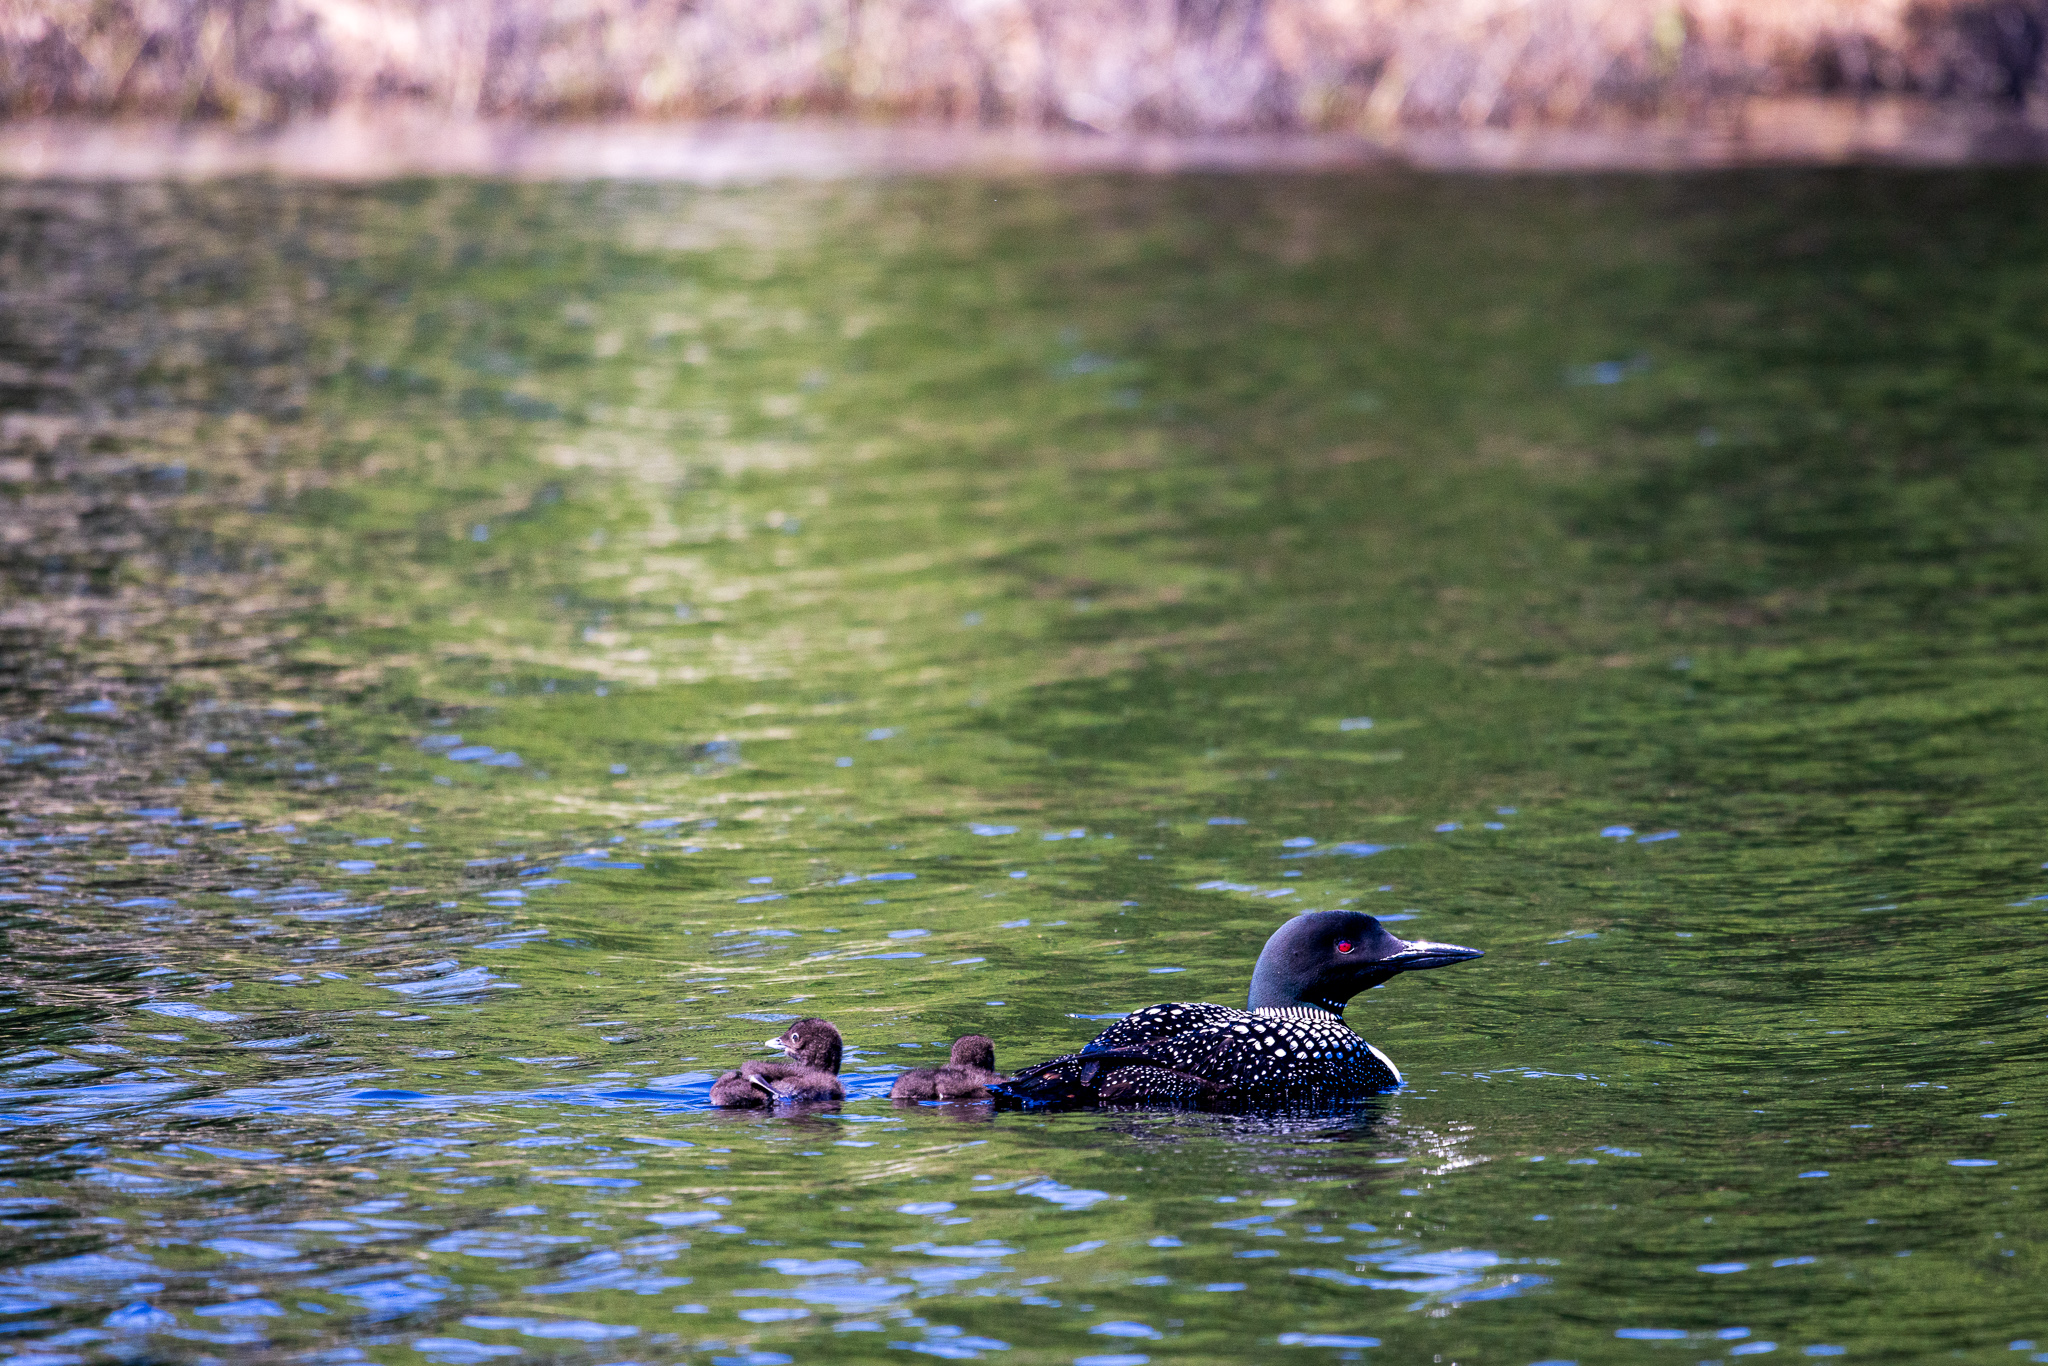 Female Loon & 2 Loon Chicks at Voyageurs National Park, Minnesota